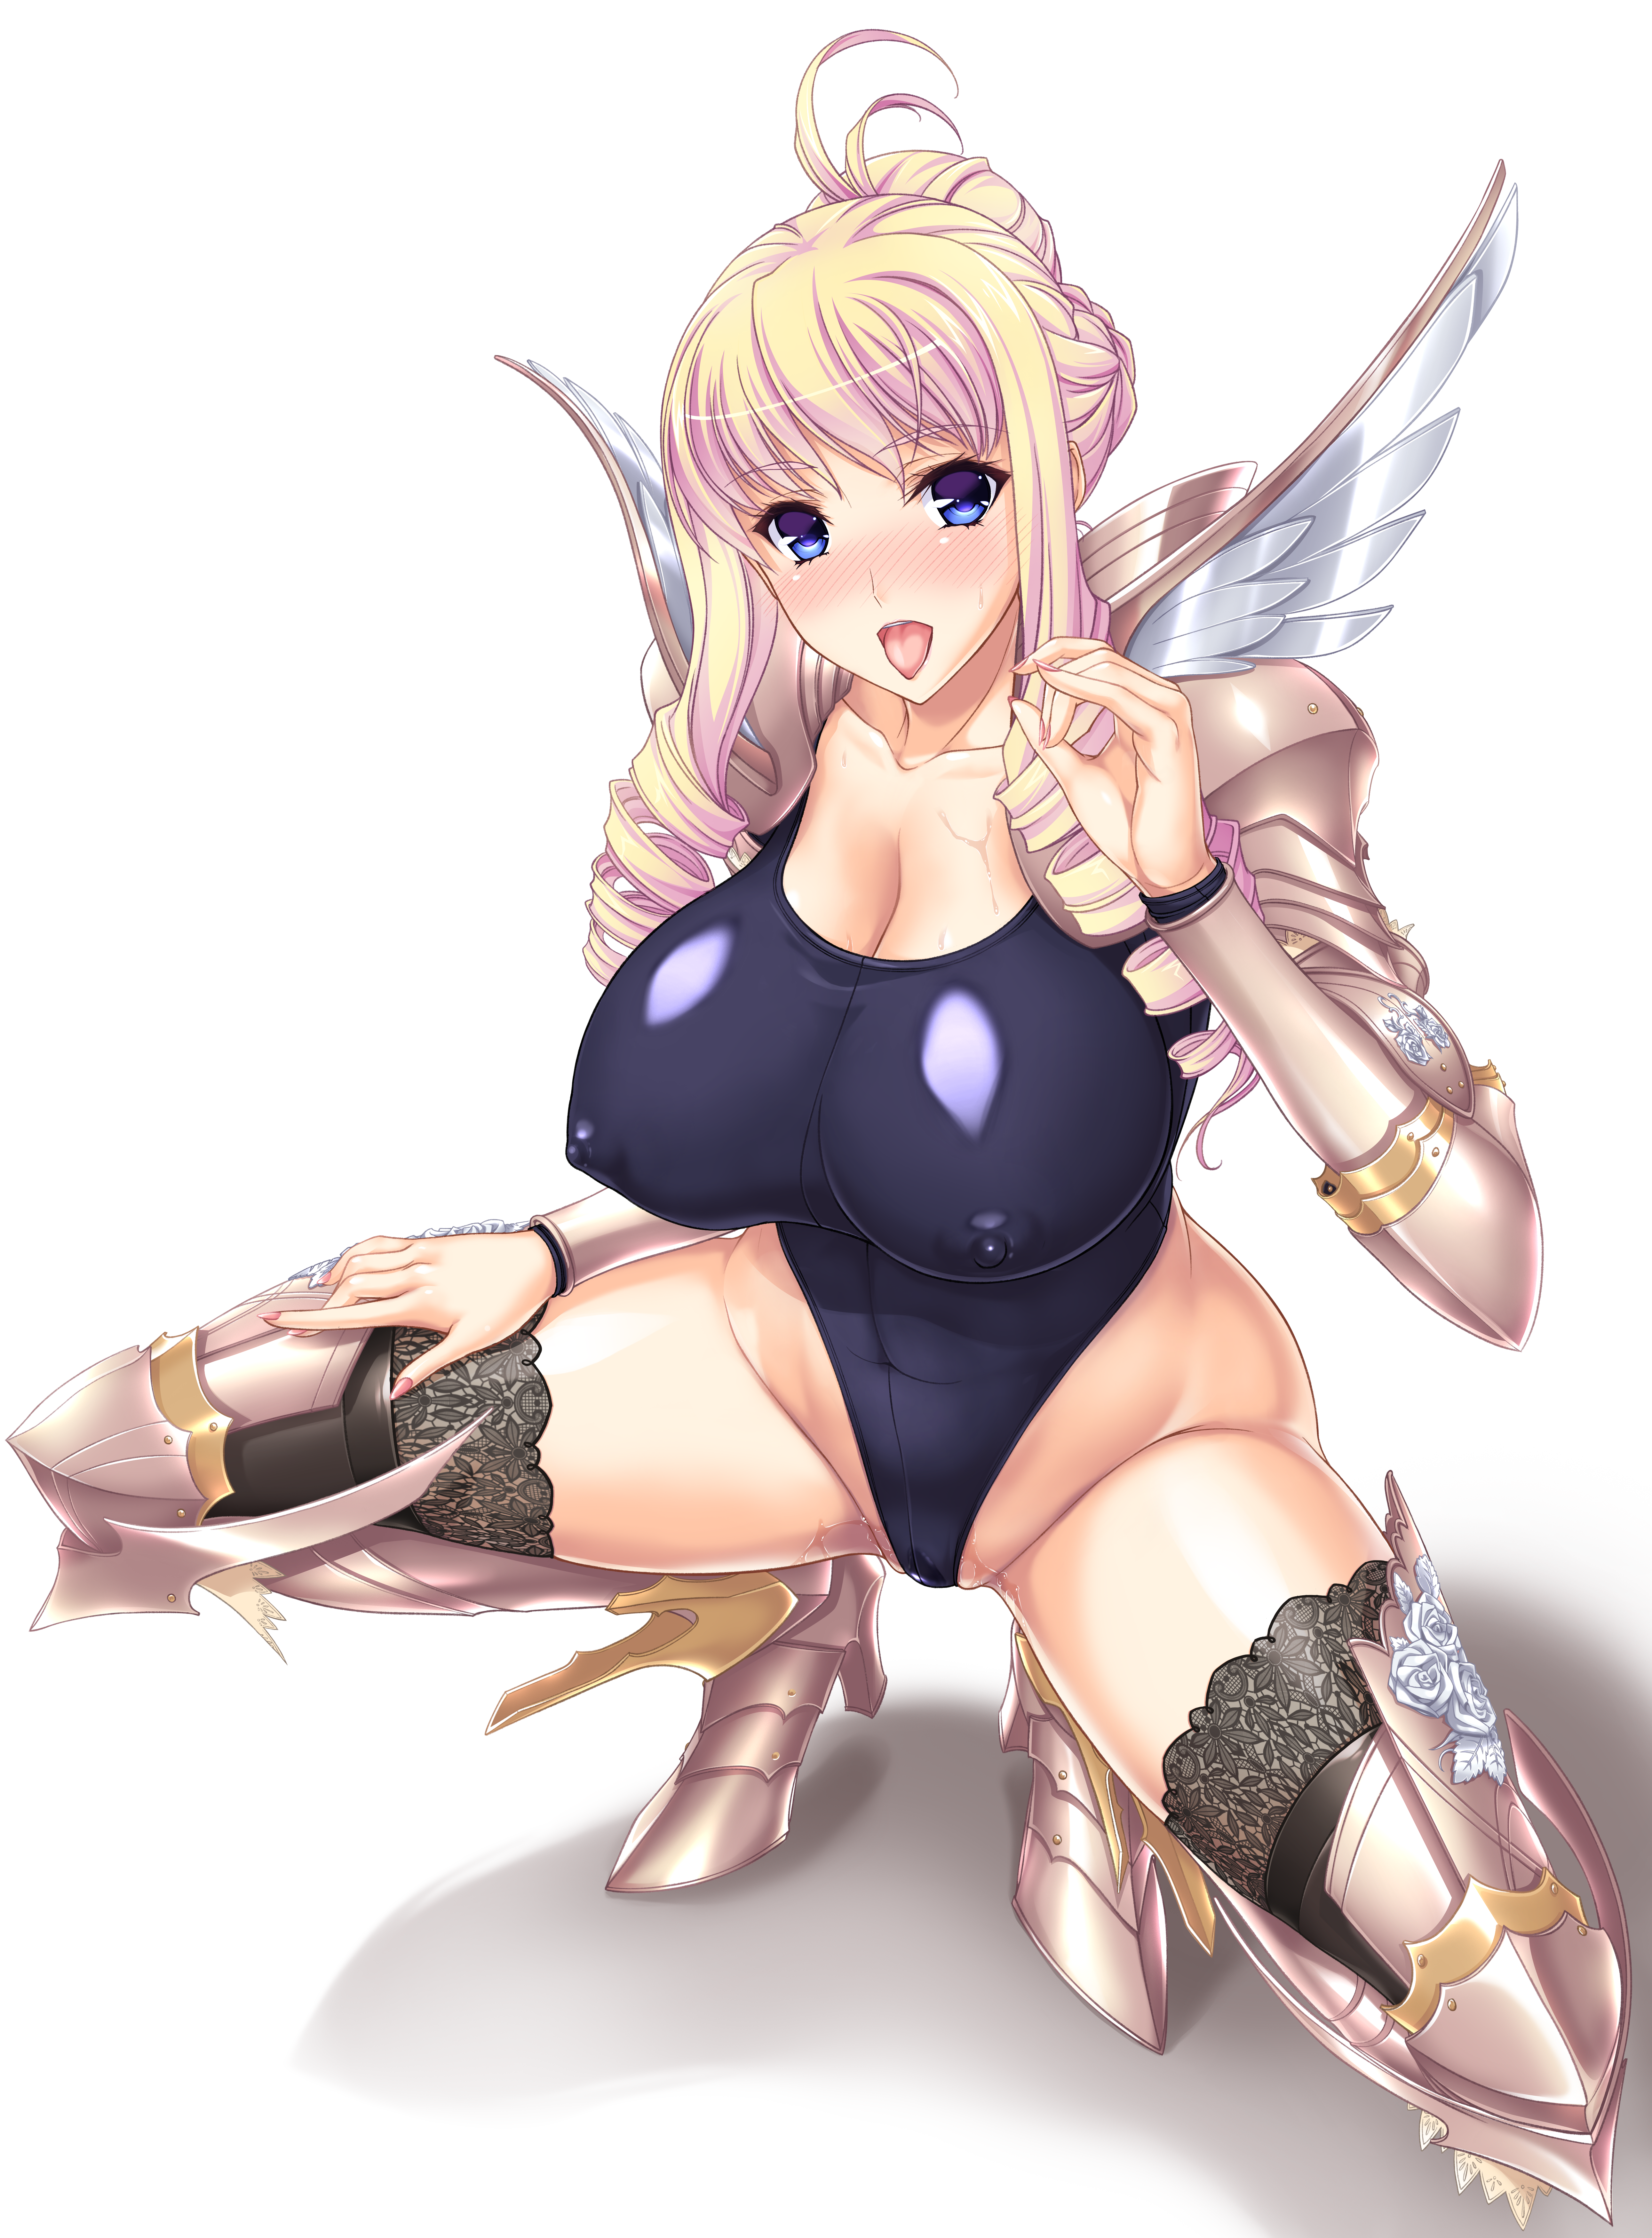 Anime 5164x6996 Walkure Romanze cleavage armor one-piece swimsuit spread legs squatting tongue out blonde anime girls blue eyes heels oral sex